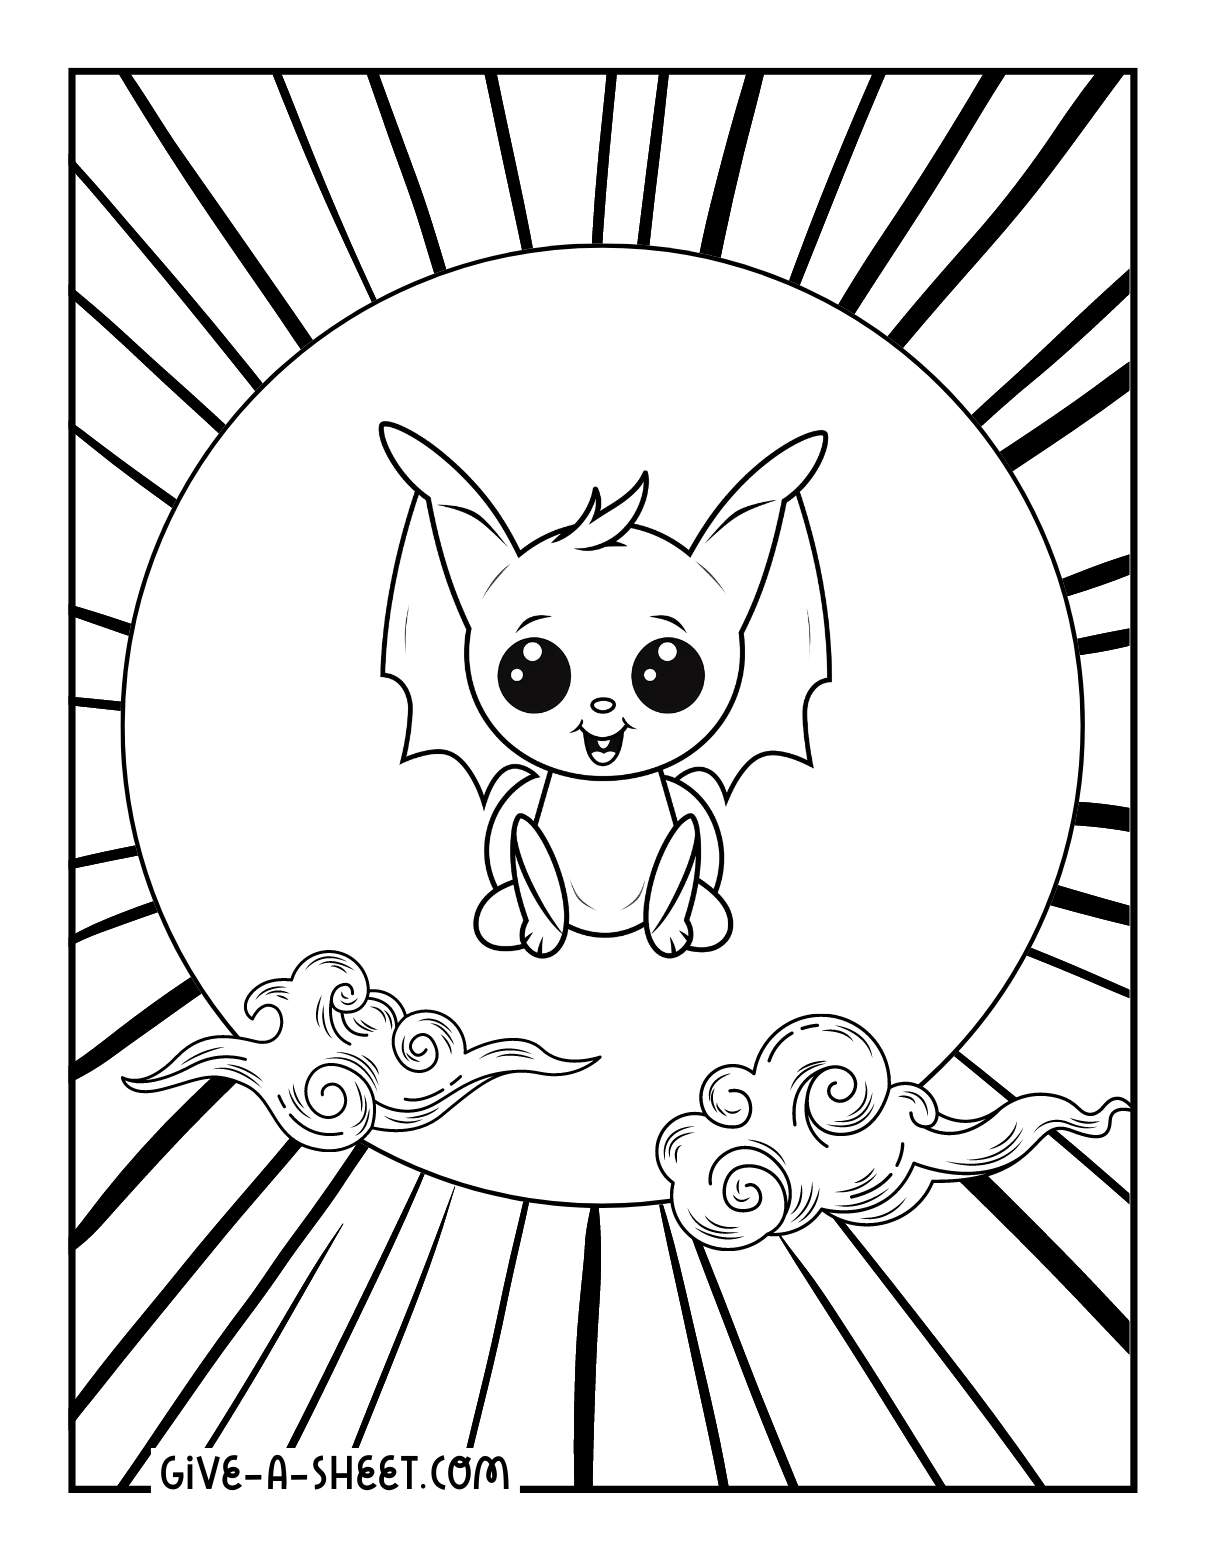 Cute bat coloring pages for kids.